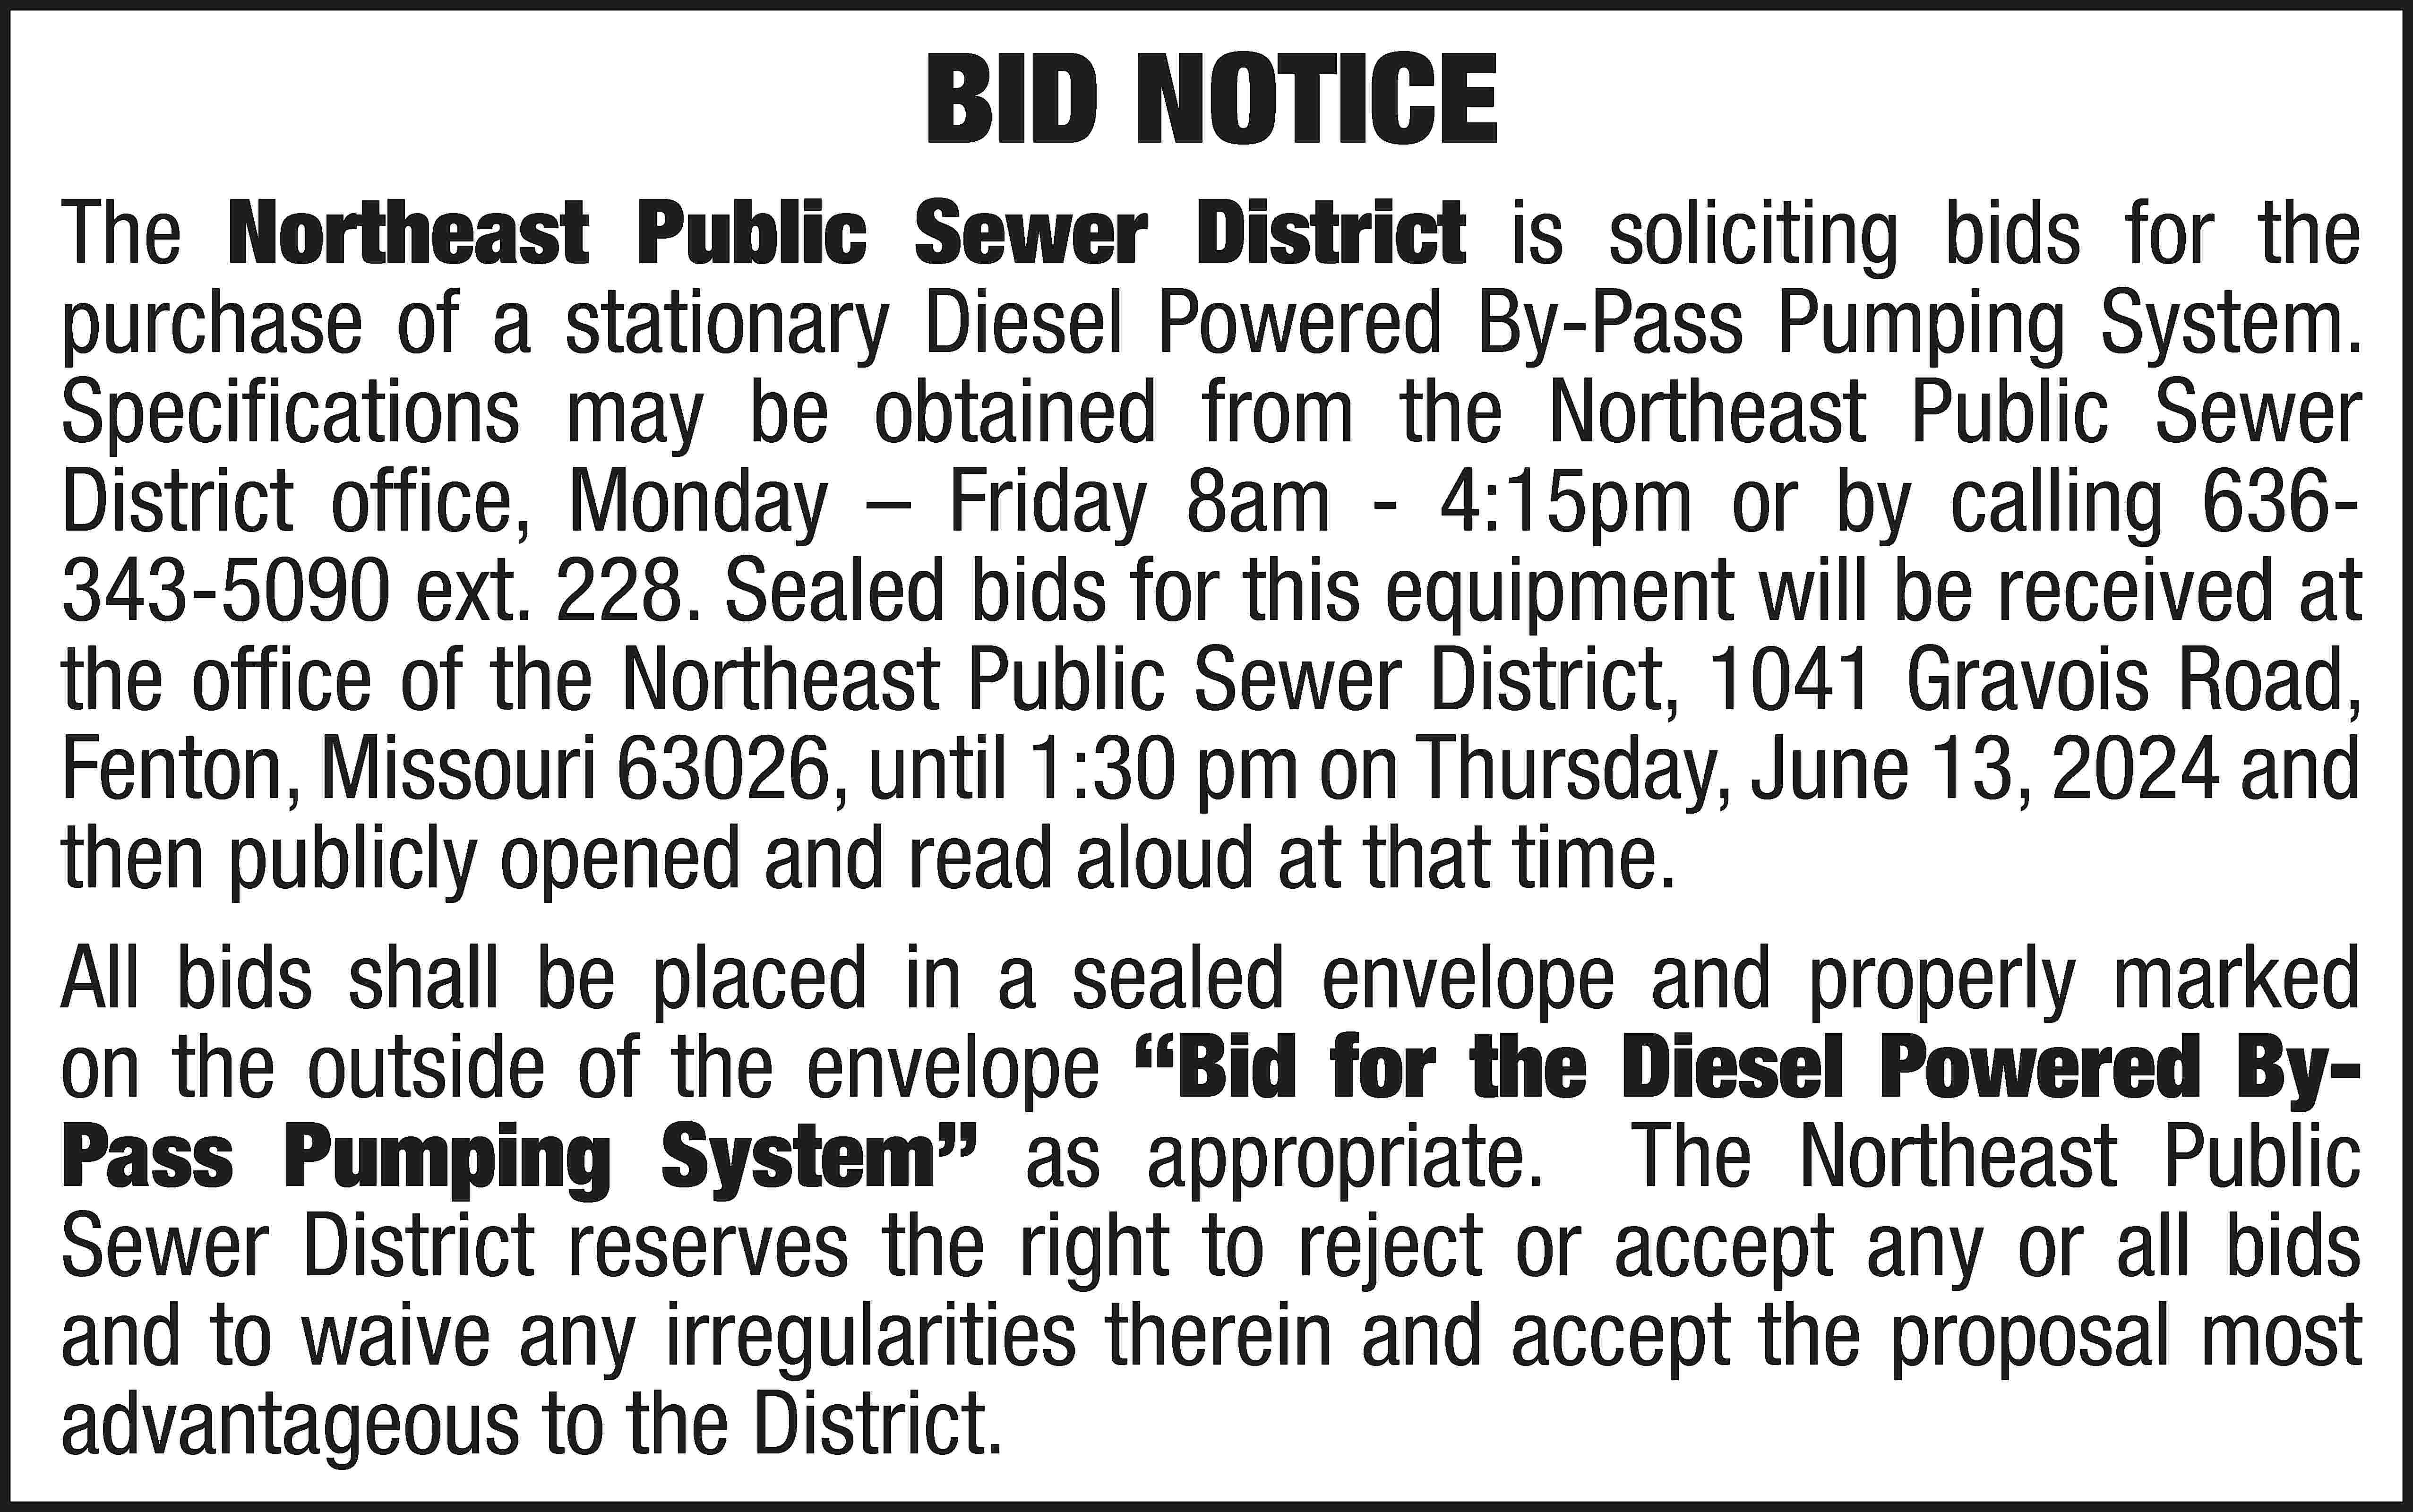 BID NOTICE The Northeast Public  BID NOTICE The Northeast Public Sewer District is soliciting bids for the purchase of a stationary Diesel Powered By-Pass Pumping System. Specifications may be obtained from the Northeast Public Sewer District office, Monday – Friday 8am - 4:15pm or by calling 636343-5090 ext. 228. Sealed bids for this equipment will be received at the office of the Northeast Public Sewer District, 1041 Gravois Road, Fenton, Missouri 63026, until 1:30 pm on Thursday, June 13, 2024 and then publicly opened and read aloud at that time. All bids shall be placed in a sealed envelope and properly marked on the outside of the envelope “Bid for the Diesel Powered ByPass Pumping System” as appropriate. The Northeast Public Sewer District reserves the right to reject or accept any or all bids and to waive any irregularities therein and accept the proposal most advantageous to the District.